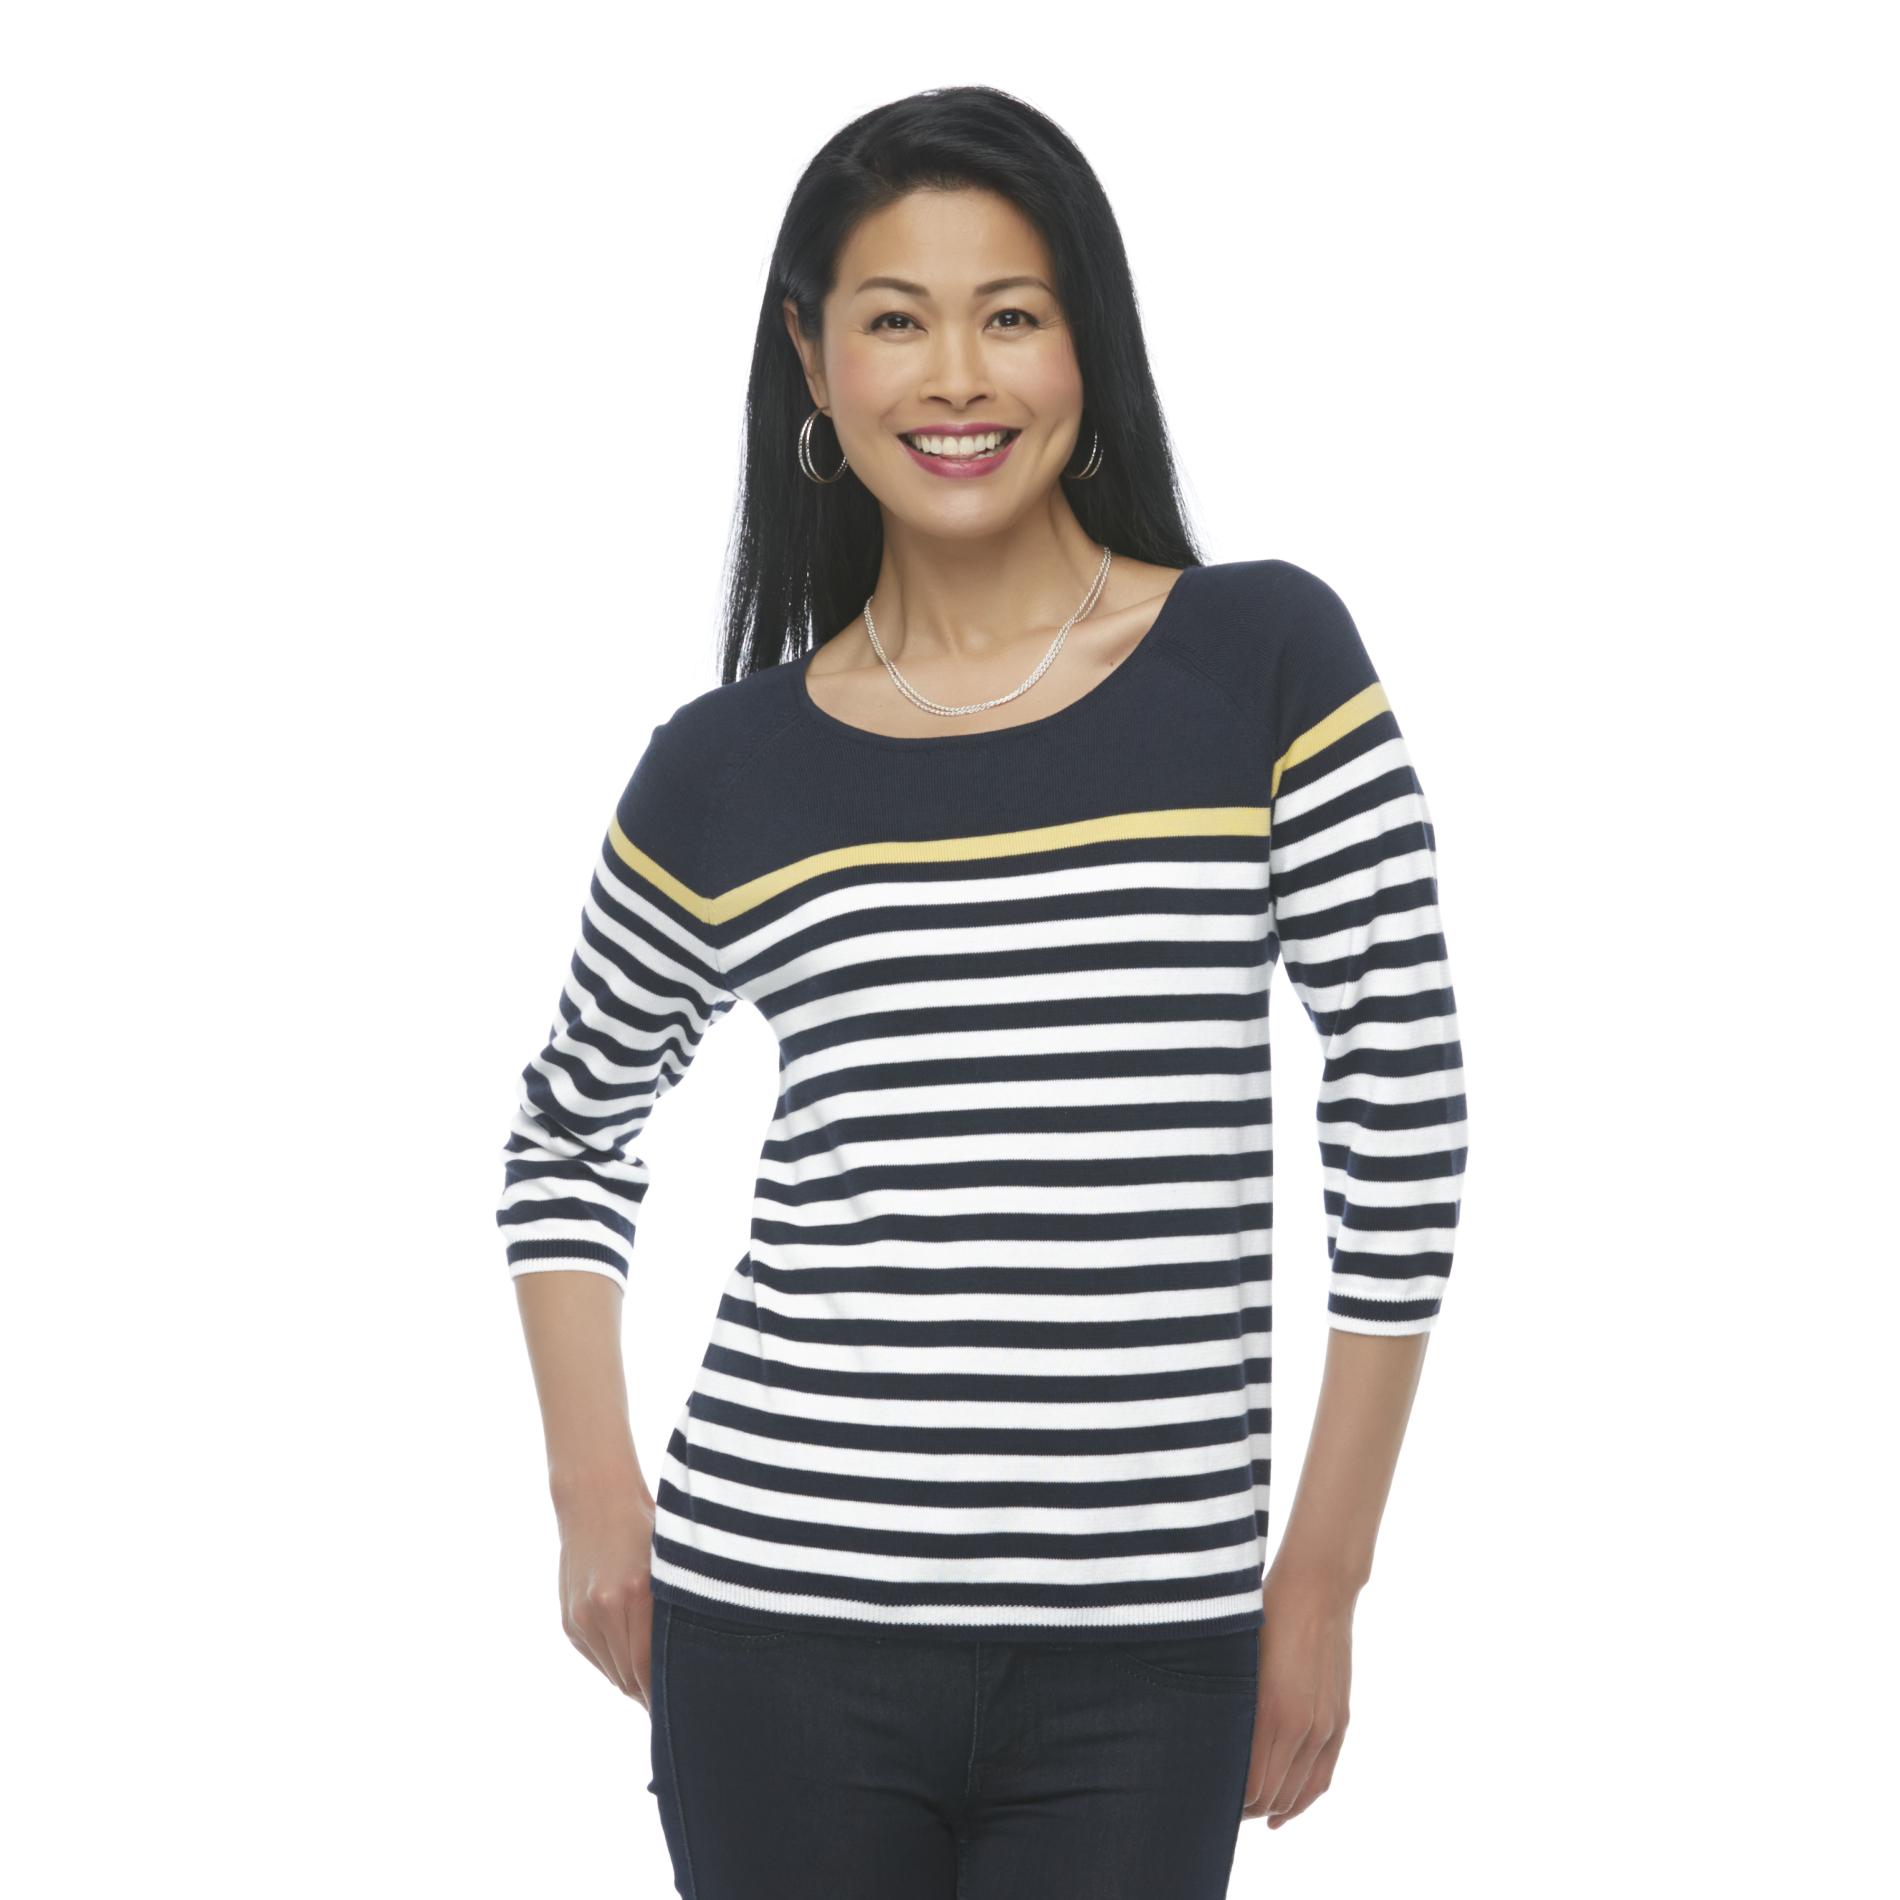 Basic Editions Women's Striped Sweater